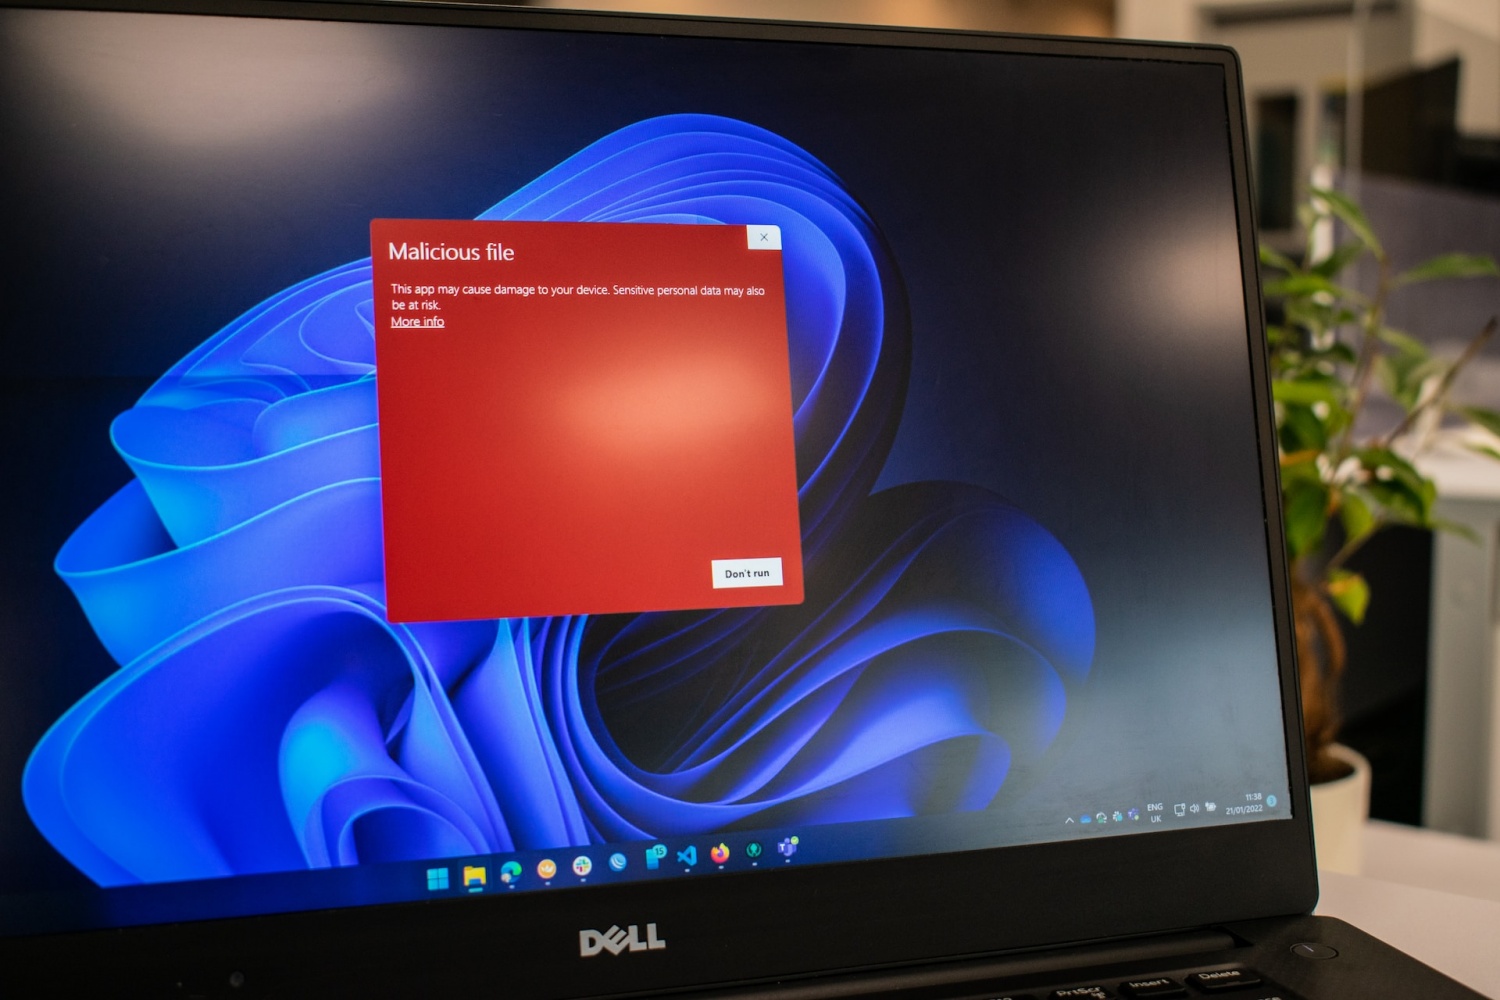 Avira Antivirus Allegedly Freezes Windows PC Upon Boot-Up, Driving Users to Uninstall The Software